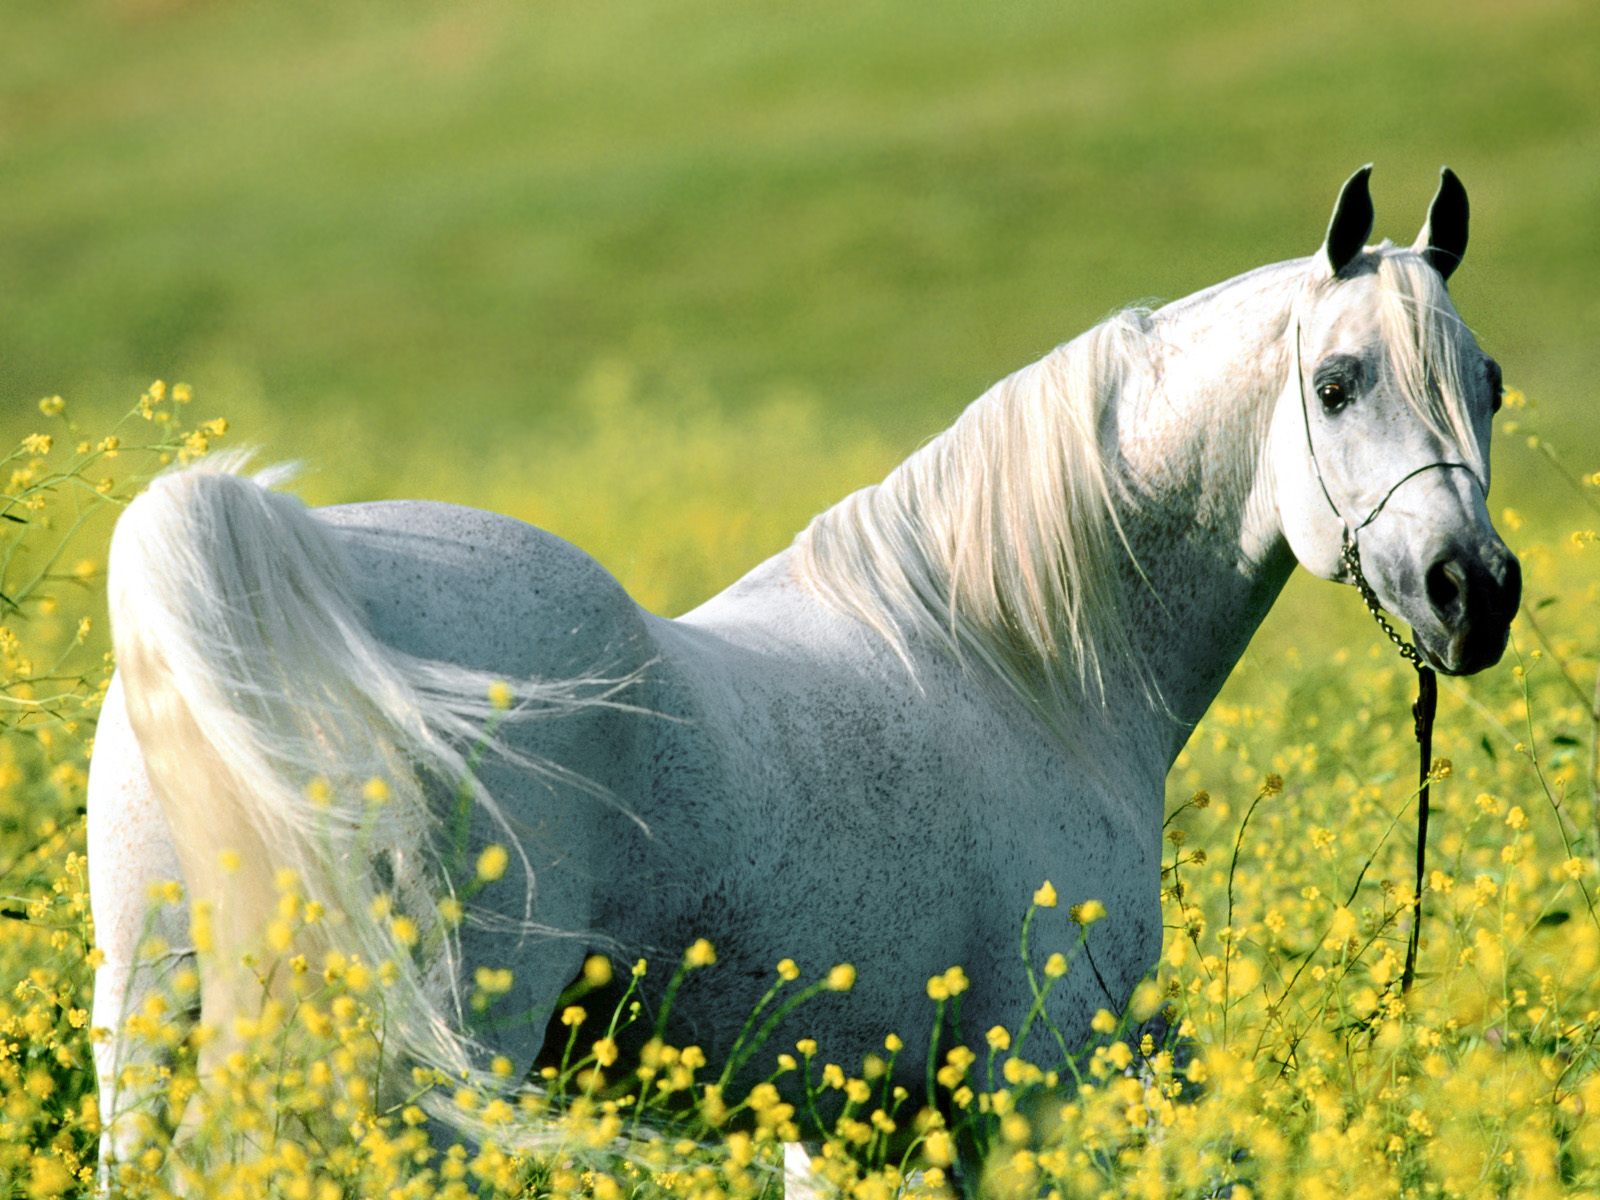 download horse backgrounds for your computer which is under the horse